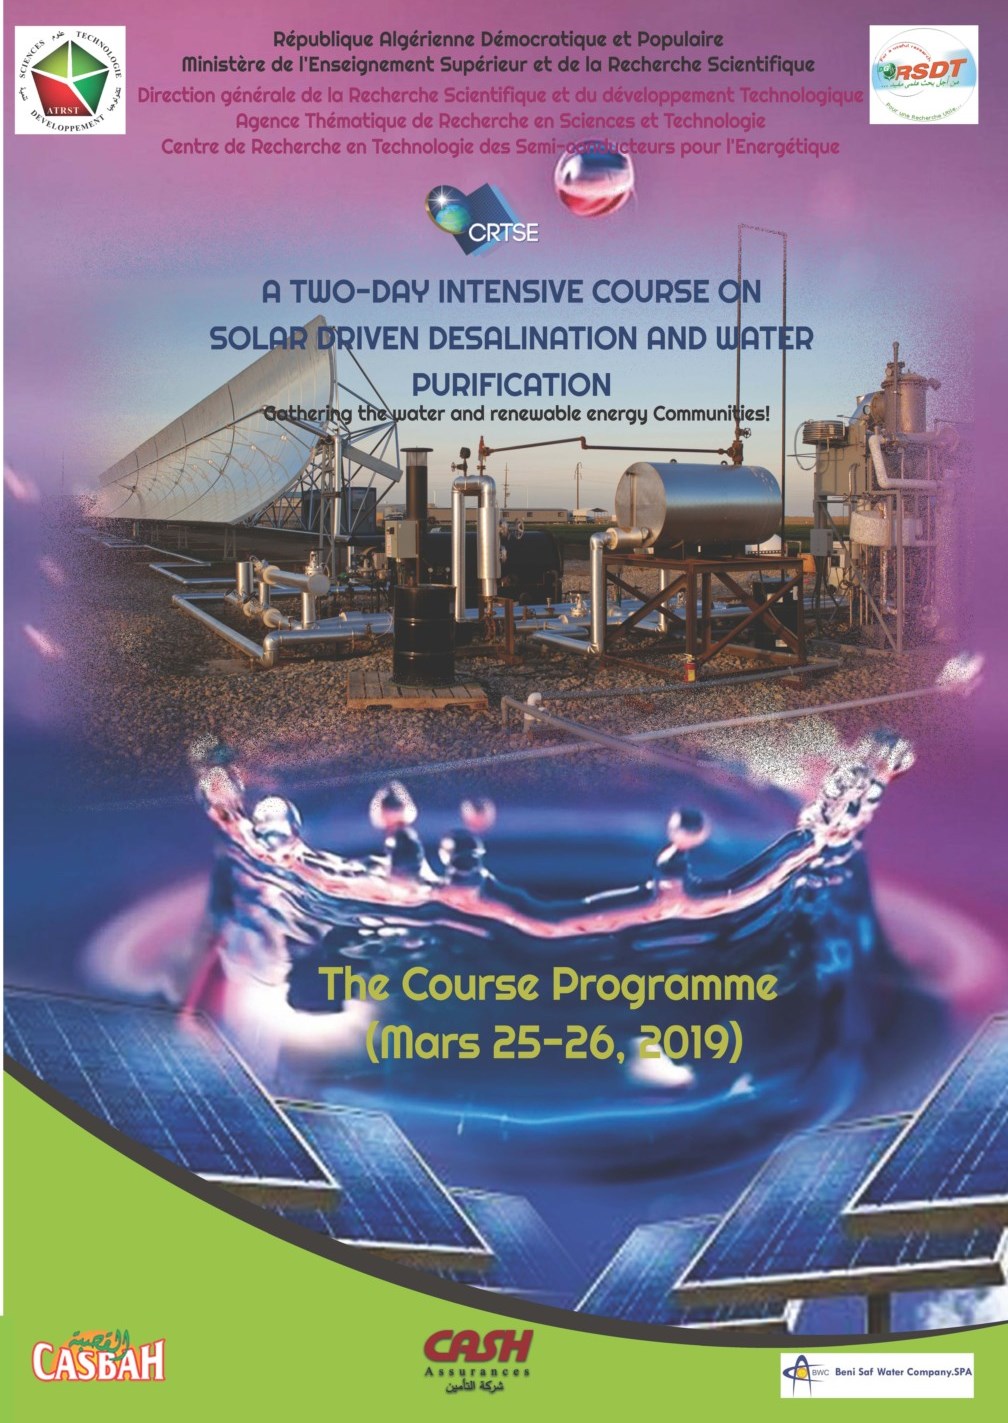 Two-Day Intensive Course on Solar Driven Desalination and Water Purification, Gathering the Water and Renewable Energy Communities, March 25th and 26th